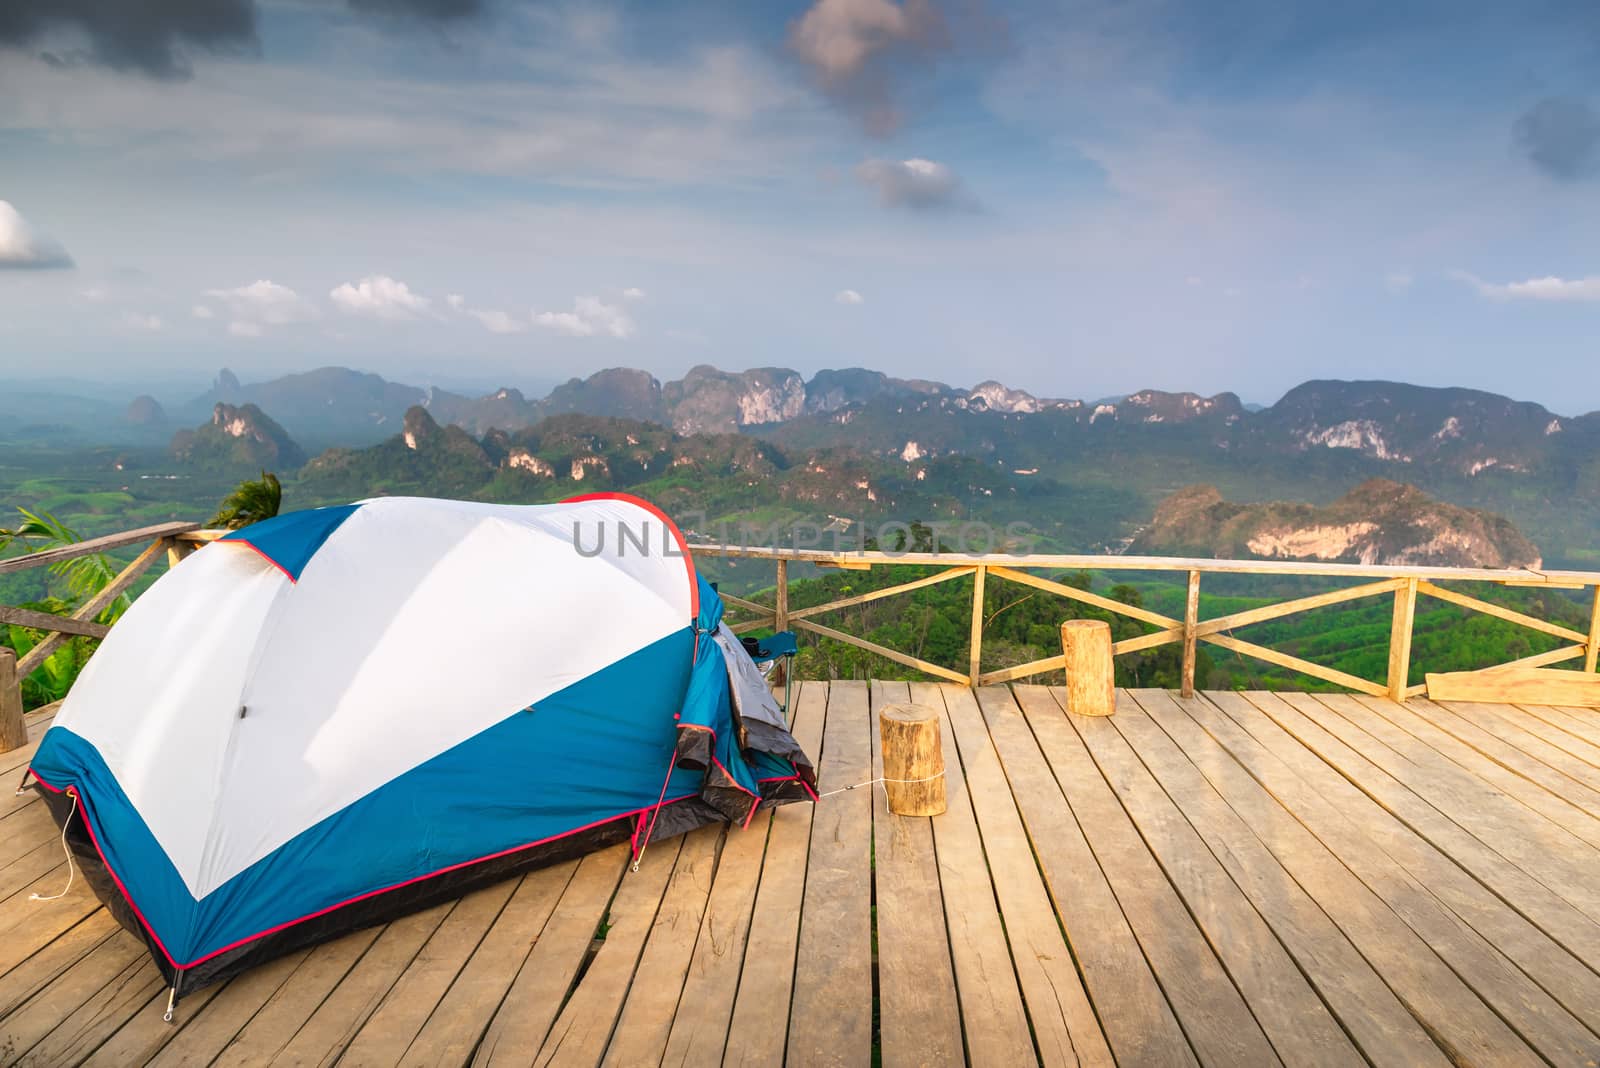 Landscape Scenery Mountains View With Camping Tent on Wooden Terrace for Outdoors Leisure Activity Relaxation. Beautiful Scenic of Nature From Campsite Viewpoint, Adventure/Vacation Lifestyle Concept.